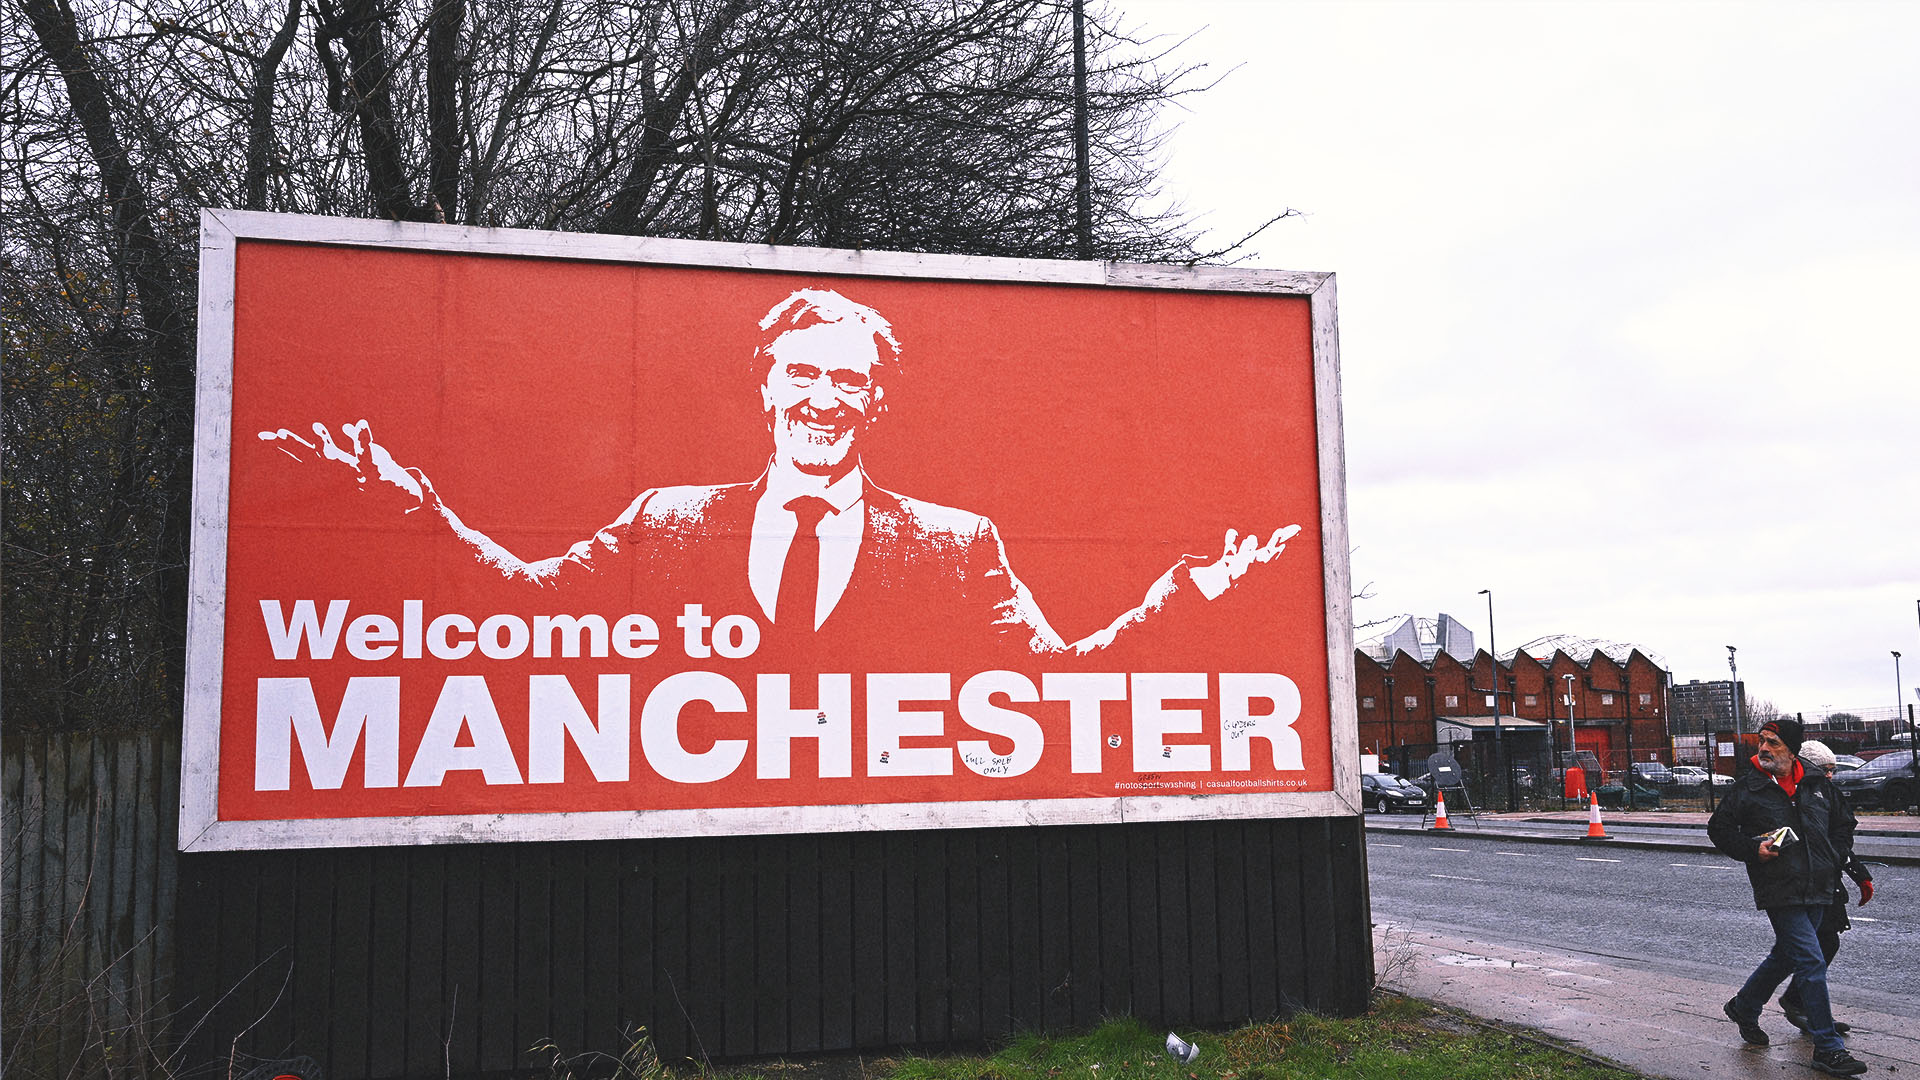 
					Man United closer to deal to sell minority stake to billionaire Jim Ratcliffe
				